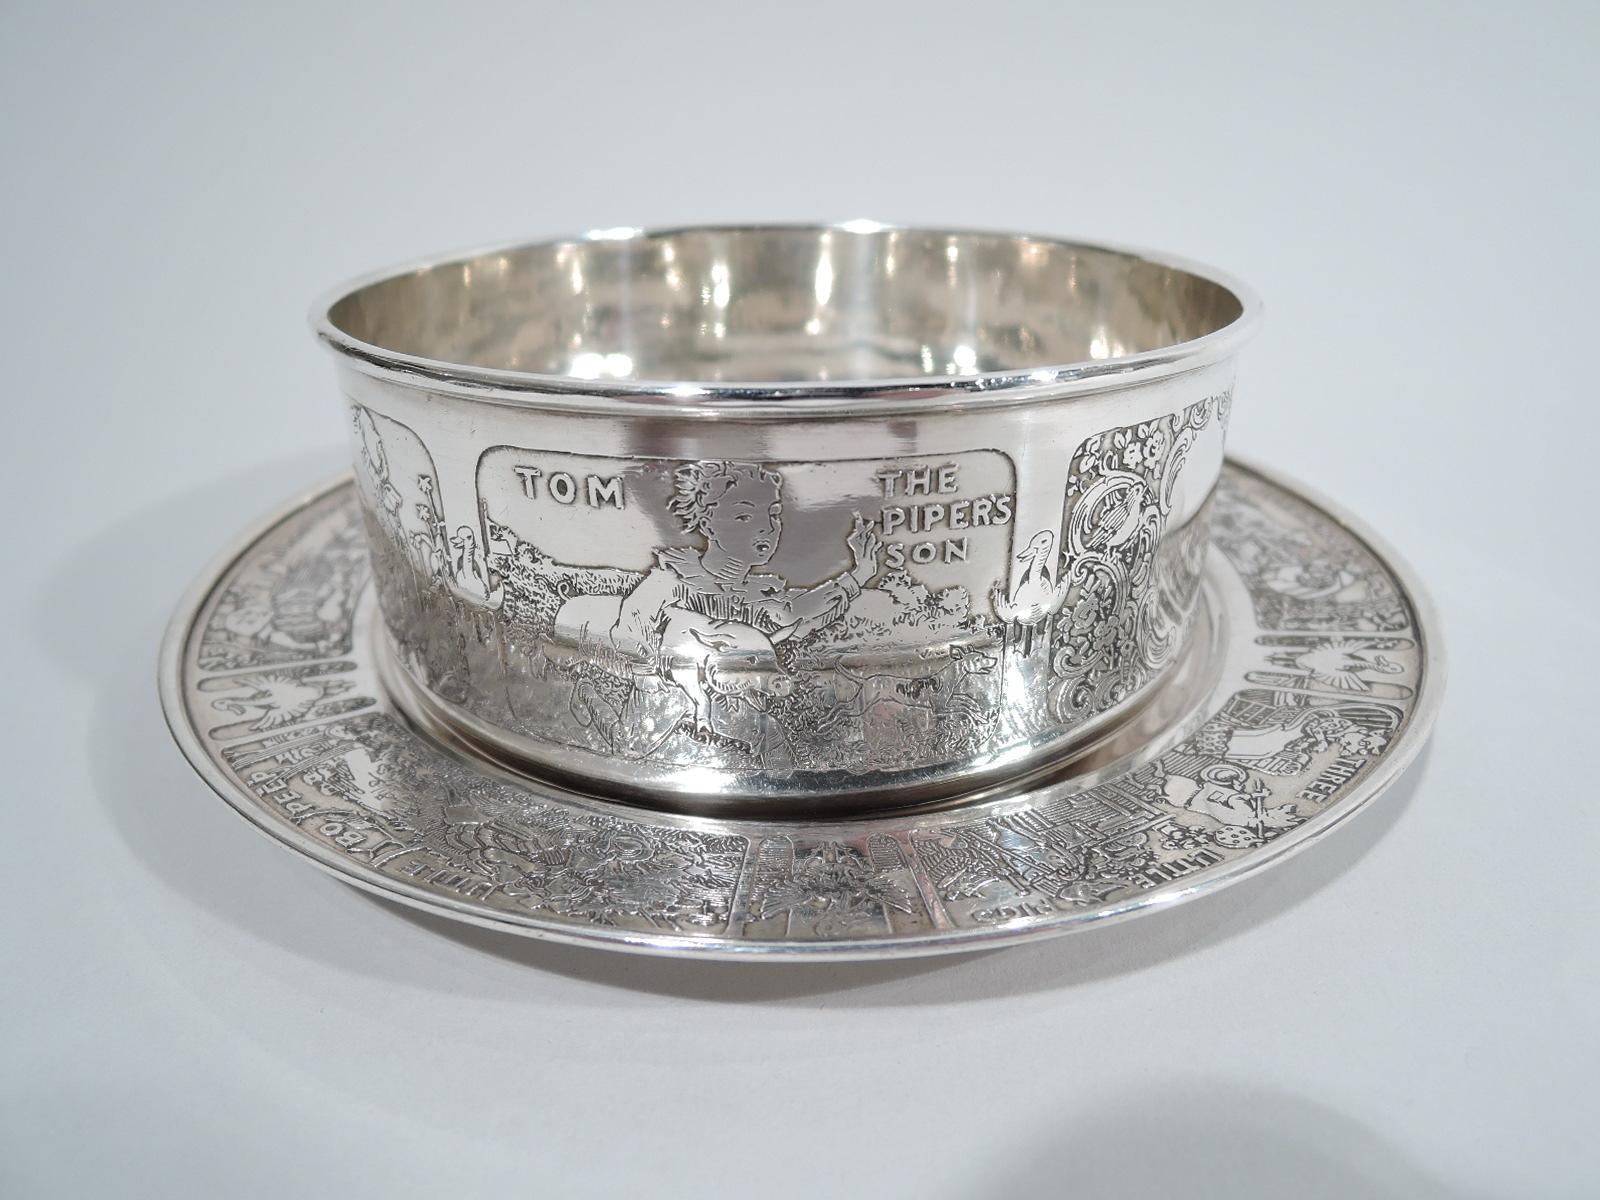 Edwardian sterling silver cereal bowl on plate. Made by Gorham in Providence, ca. 1910. The bowl has straight sides and molded rim. The plate has plain well and molded rim.

Scenes from nursery rhymes acid-etched on both pieces. On the bowl are